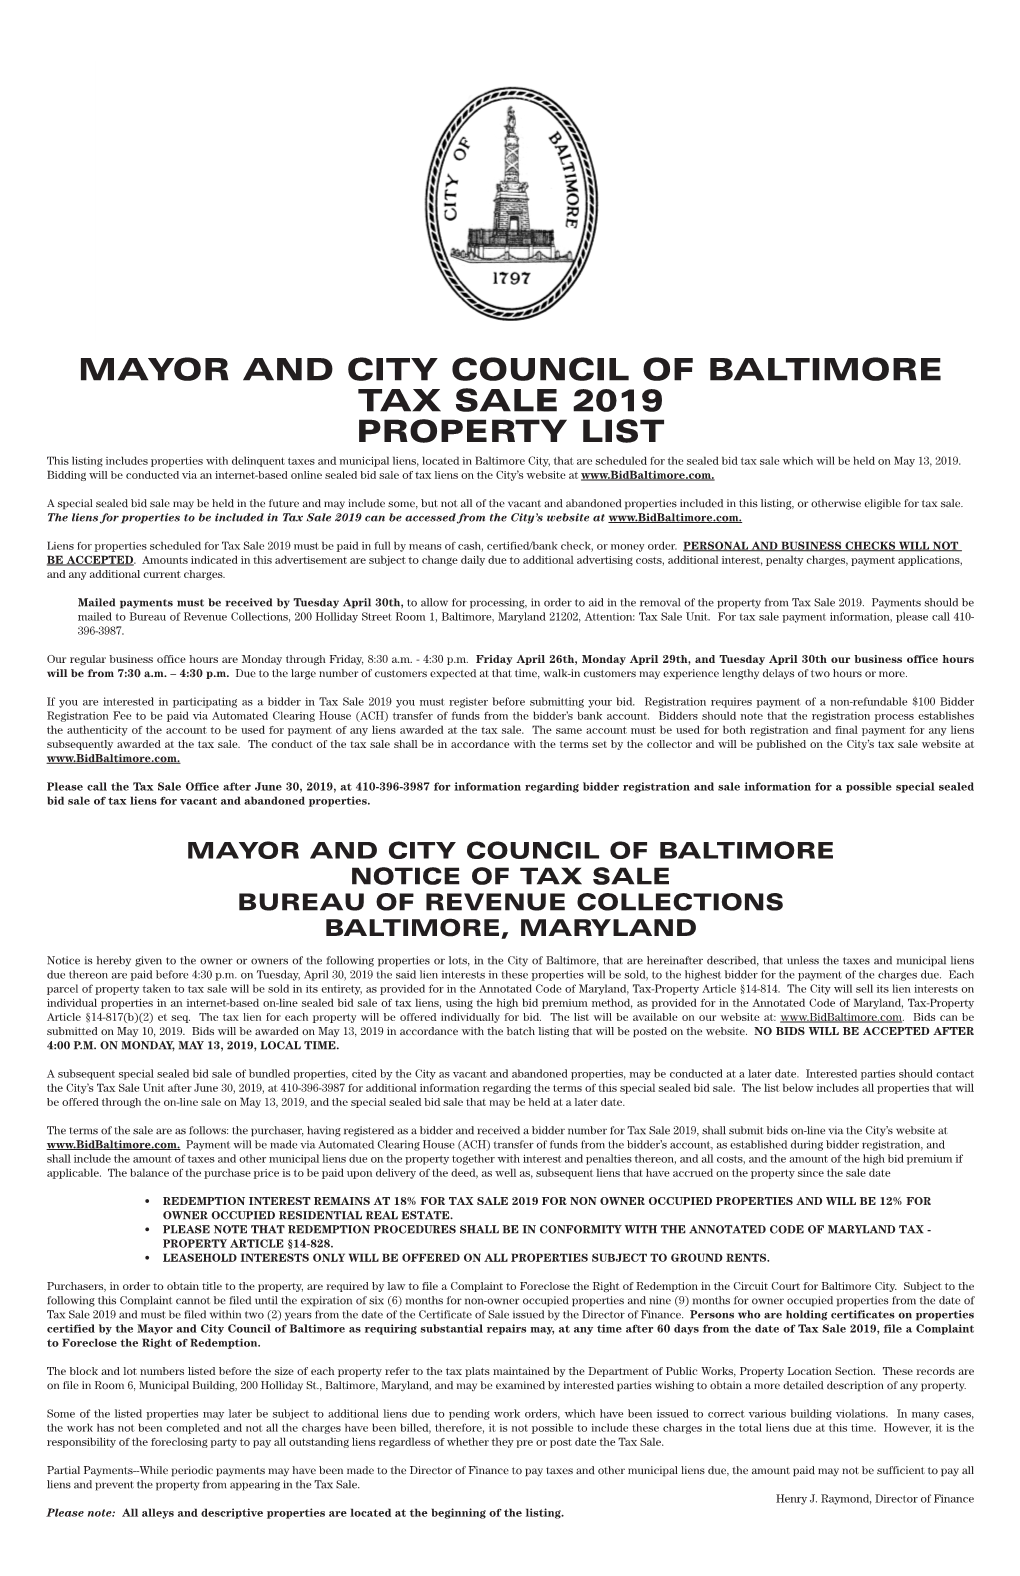 Mayor and City Council of Baltimore Tax Sale 2019